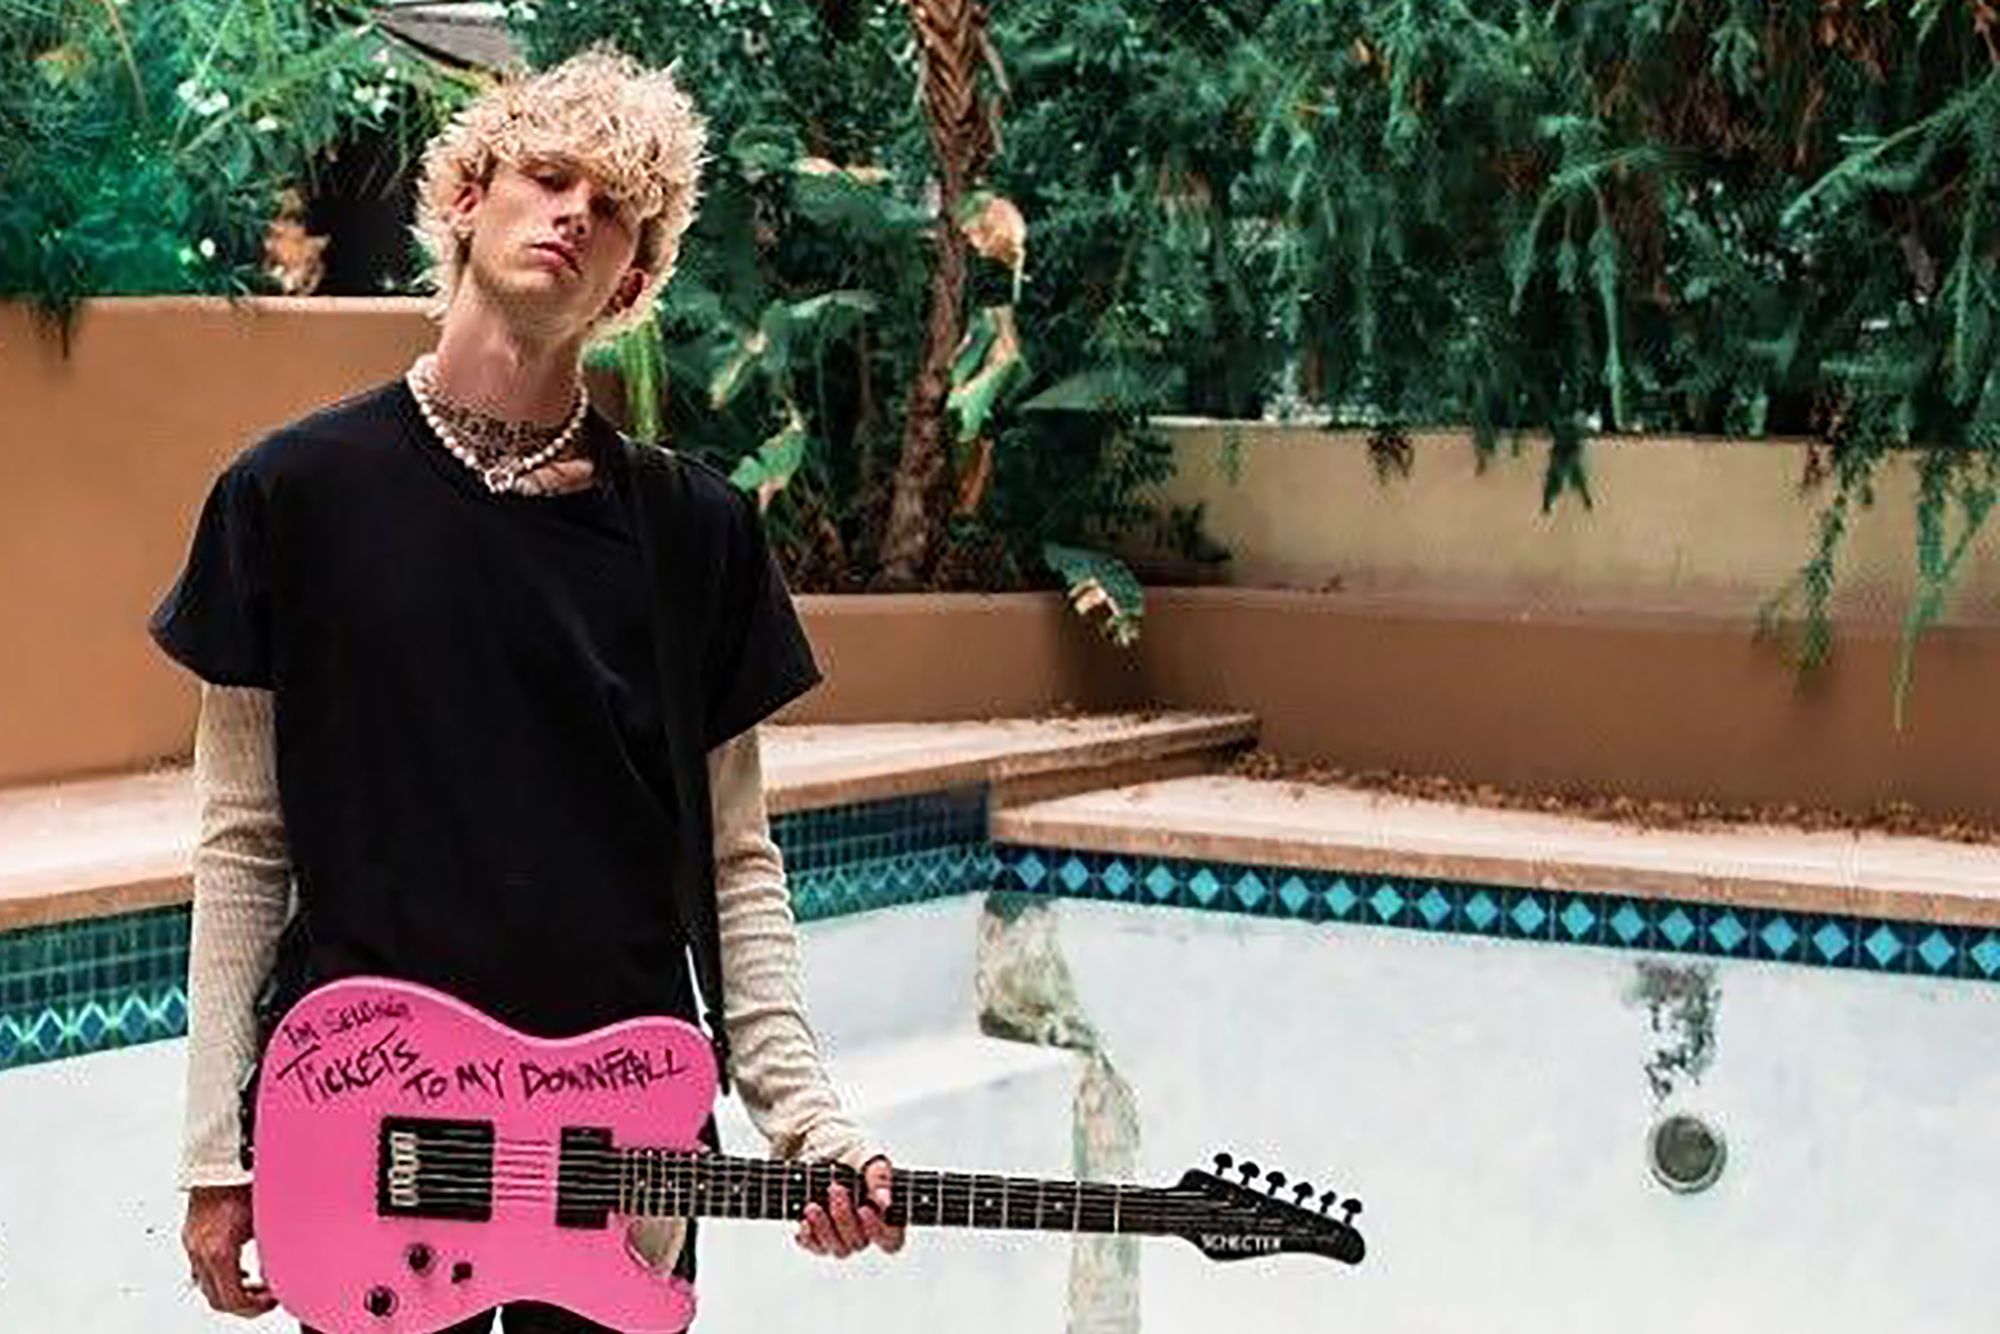 Machine Gun Kelly's 'Tickets to My Downfall' is a punk move